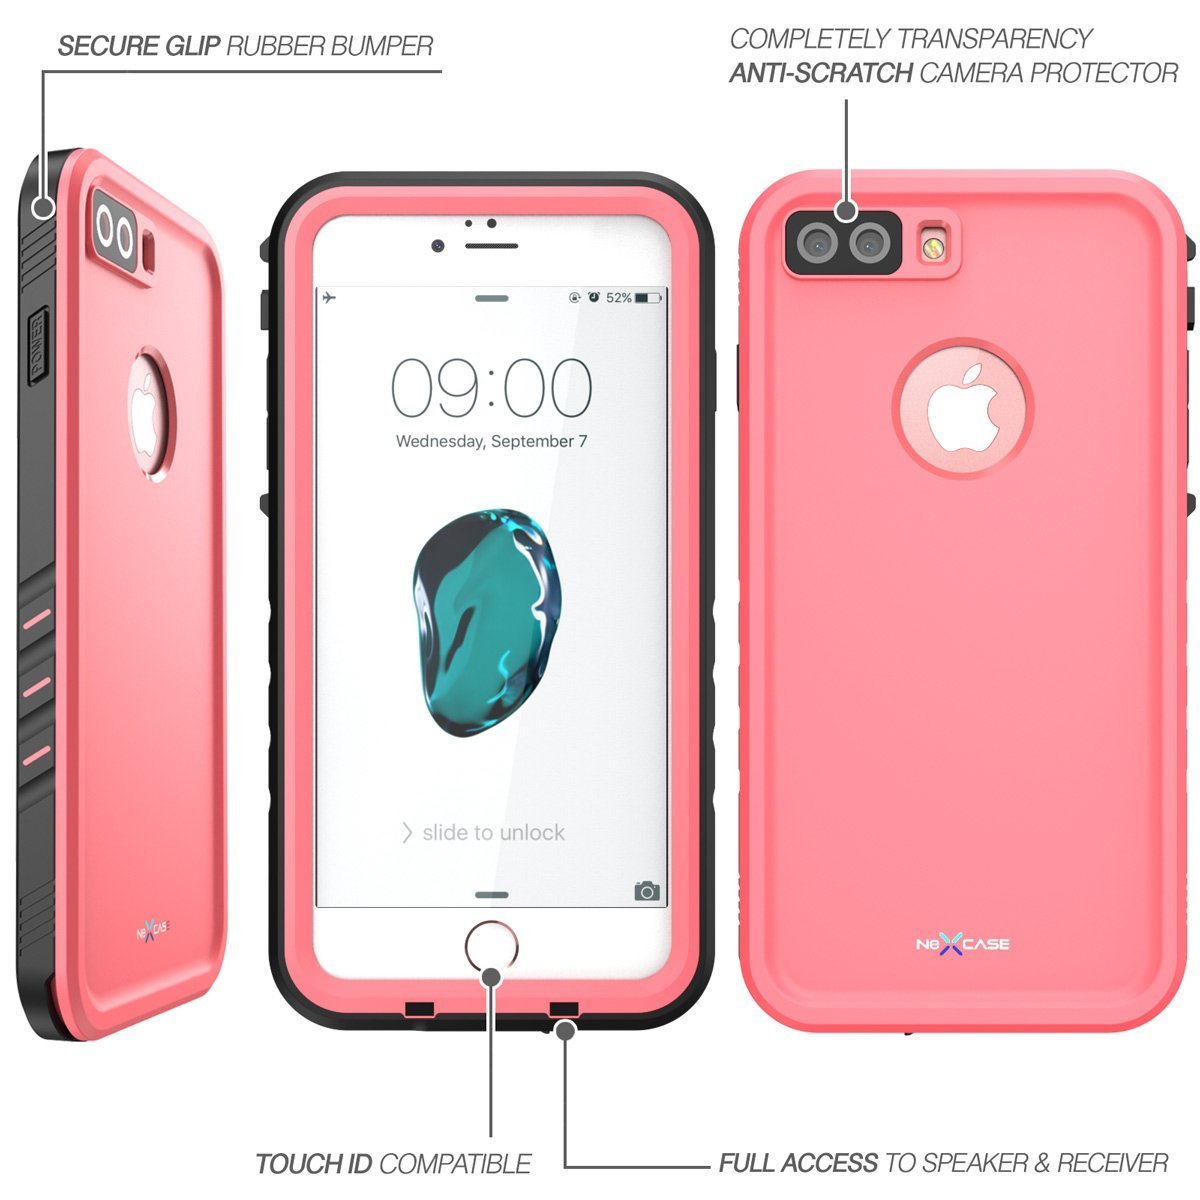 iPhone 7 Plus Case, NexCase Waterproof Full-body Rugged Case with Built-in Screen Protector for Apple iPhone 7 Plus 5.5 inch 2016 Release (Pink)